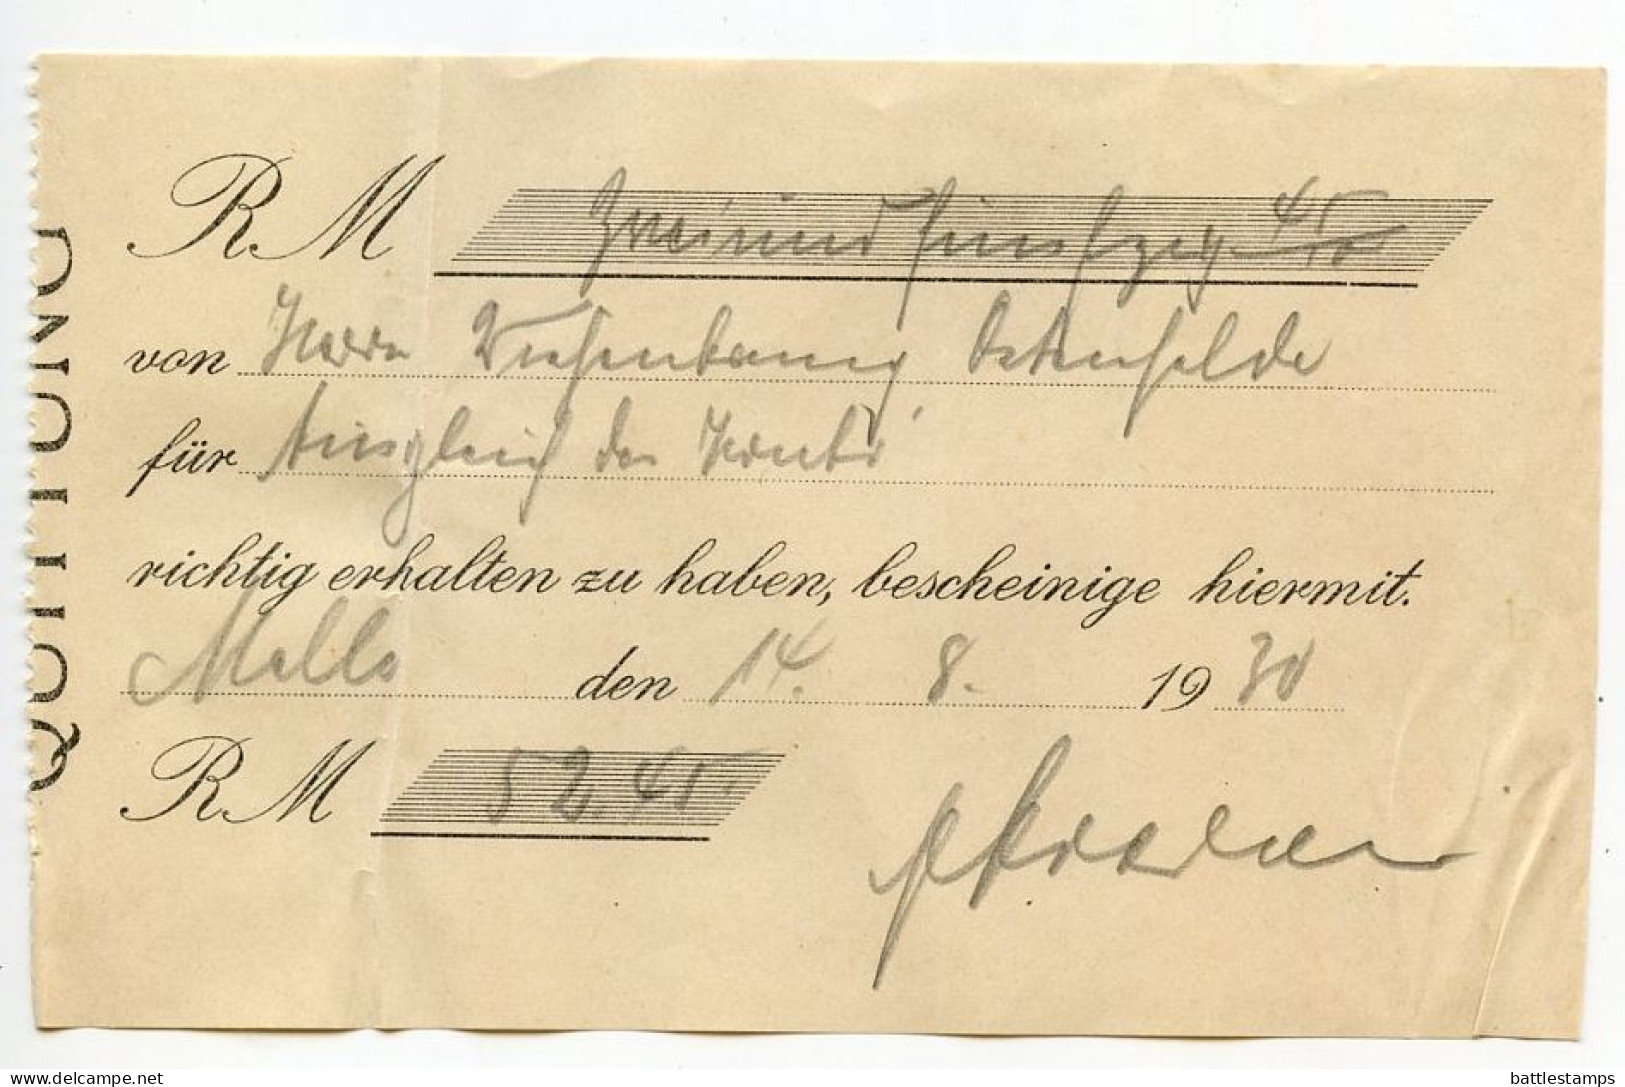 Germany 1929 Cover w/ Invoices & Receipts; Melle - Ewald Menzefricke, Automobile; 15pf. President Hindenburg